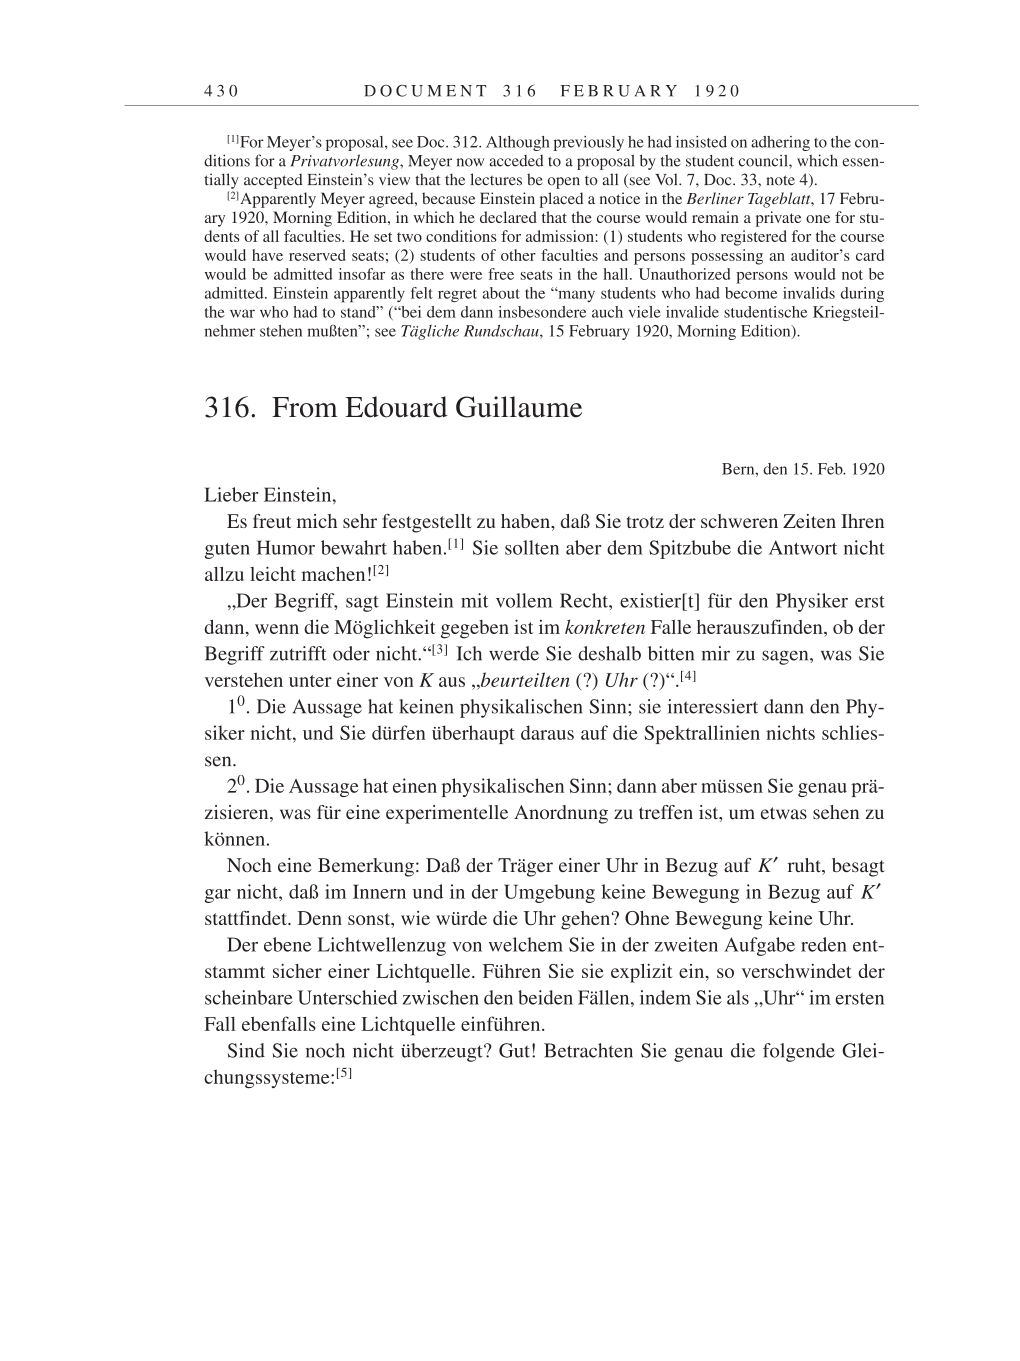 Volume 9: The Berlin Years: Correspondence January 1919-April 1920 page 430